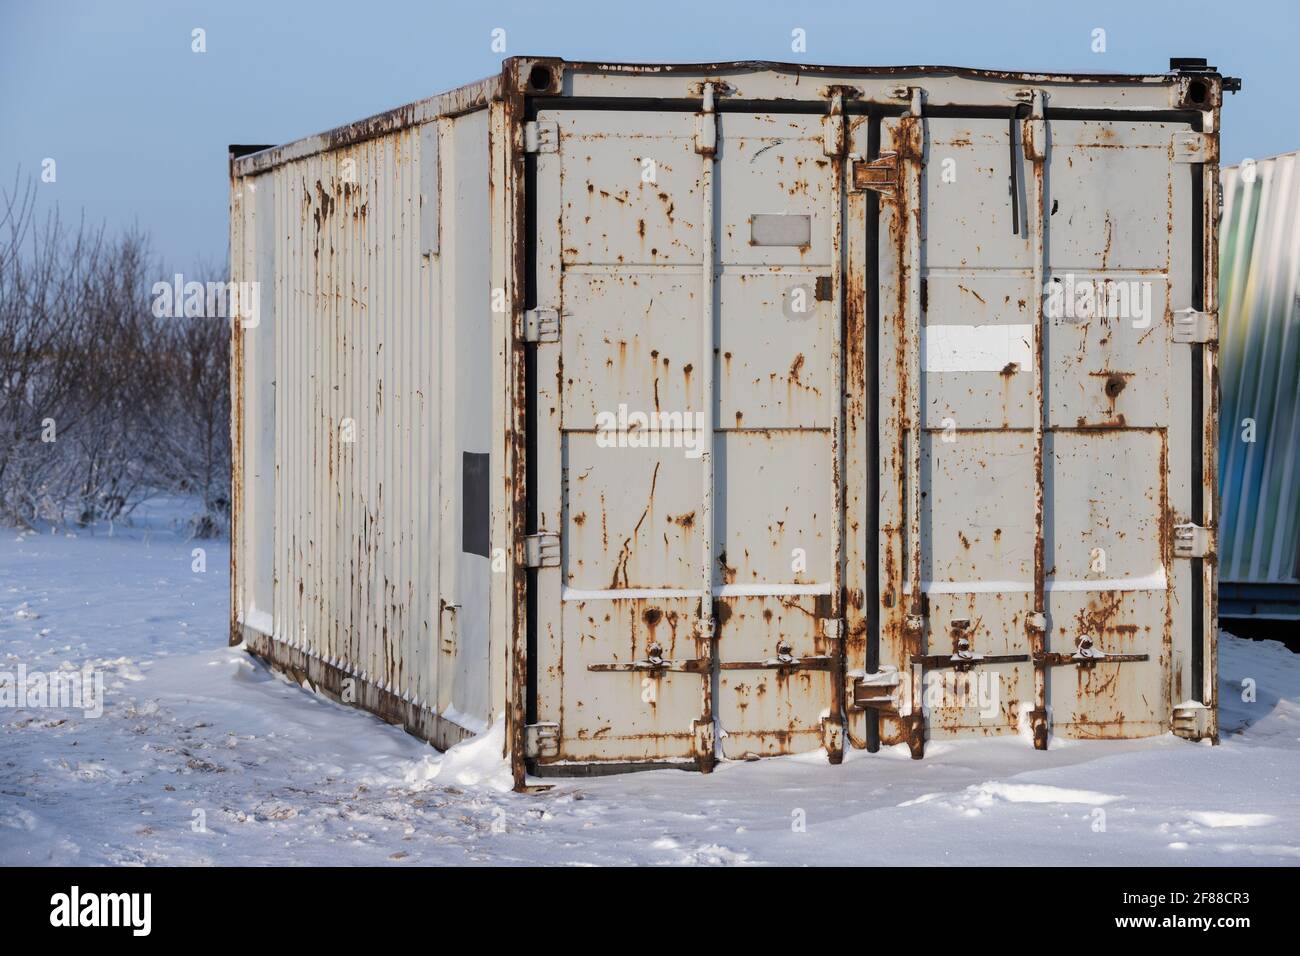 Rusty gray cargo container stands on snow, industrial shipping equipment Stock Photo